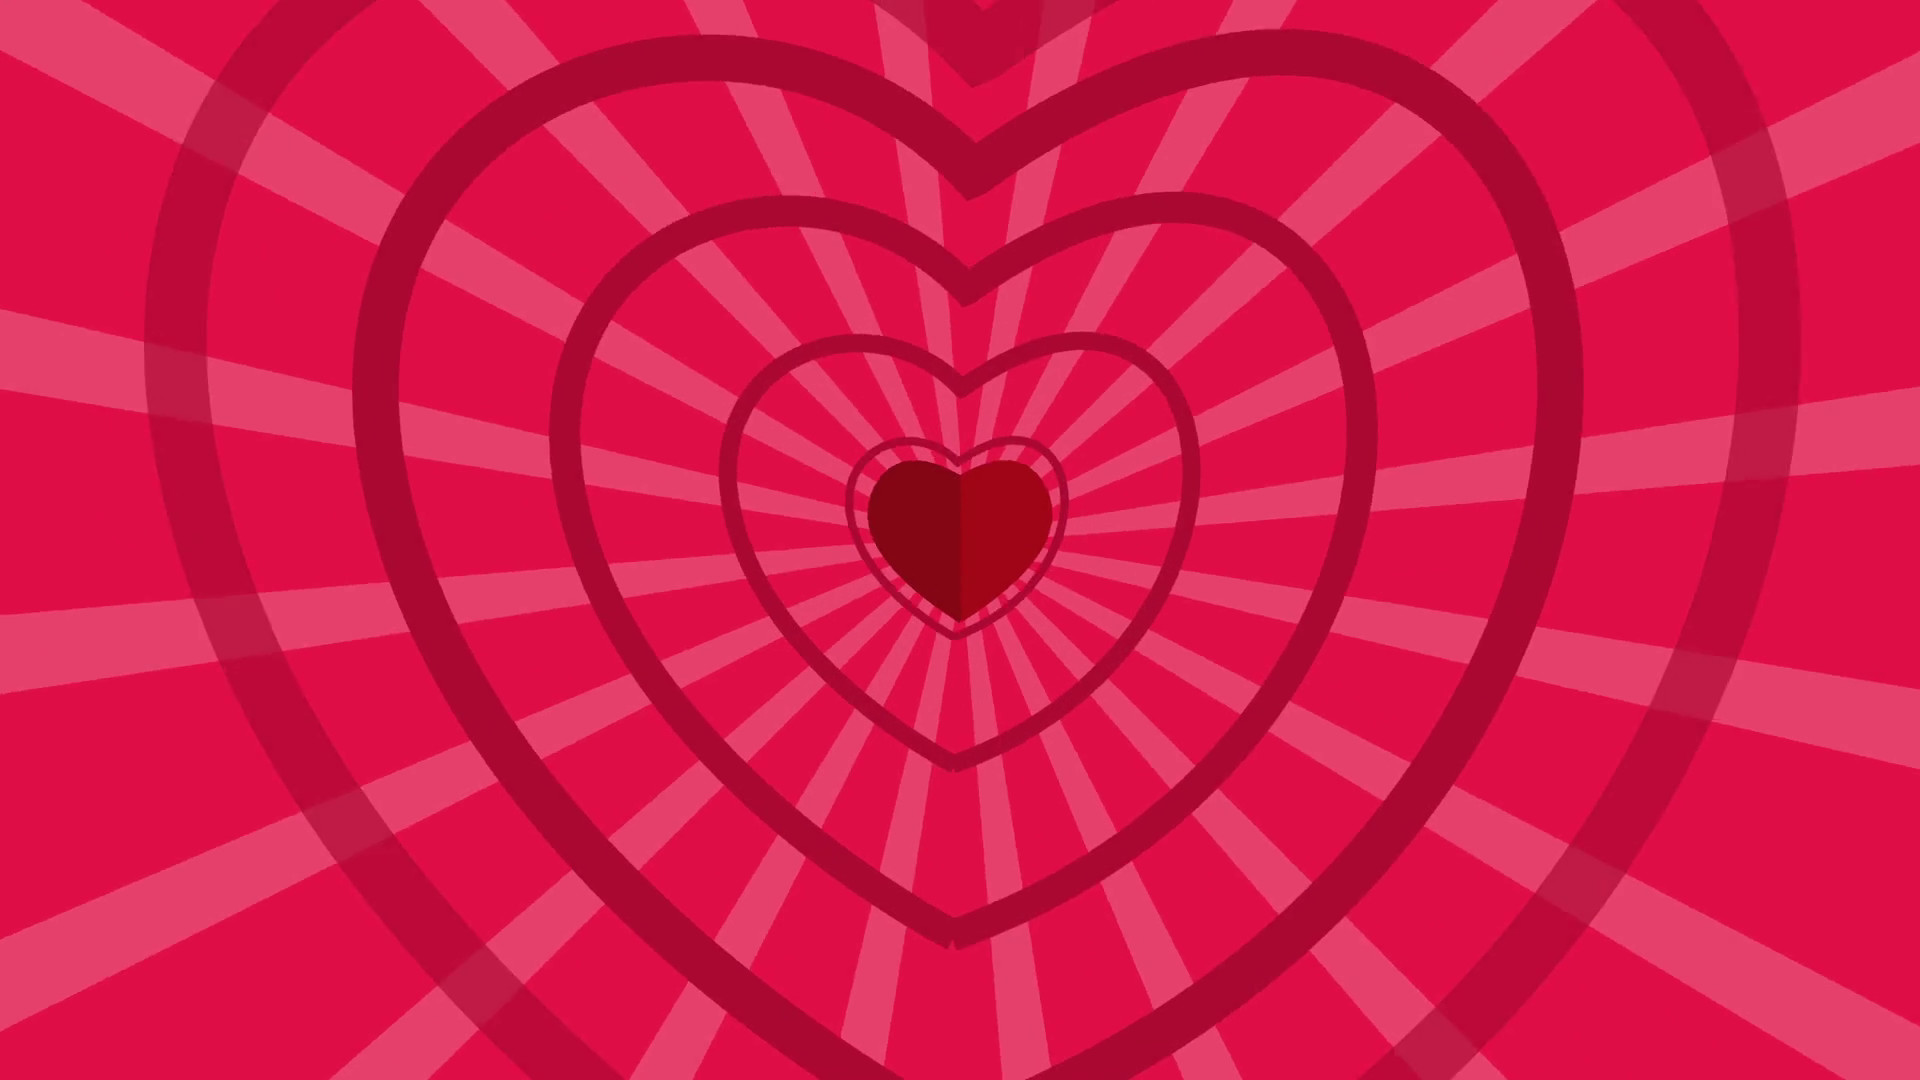 1920x1080 Seamless Looping Red and Pink Heart Animated Background. Cartoon animation  of Red hearts with sunburst